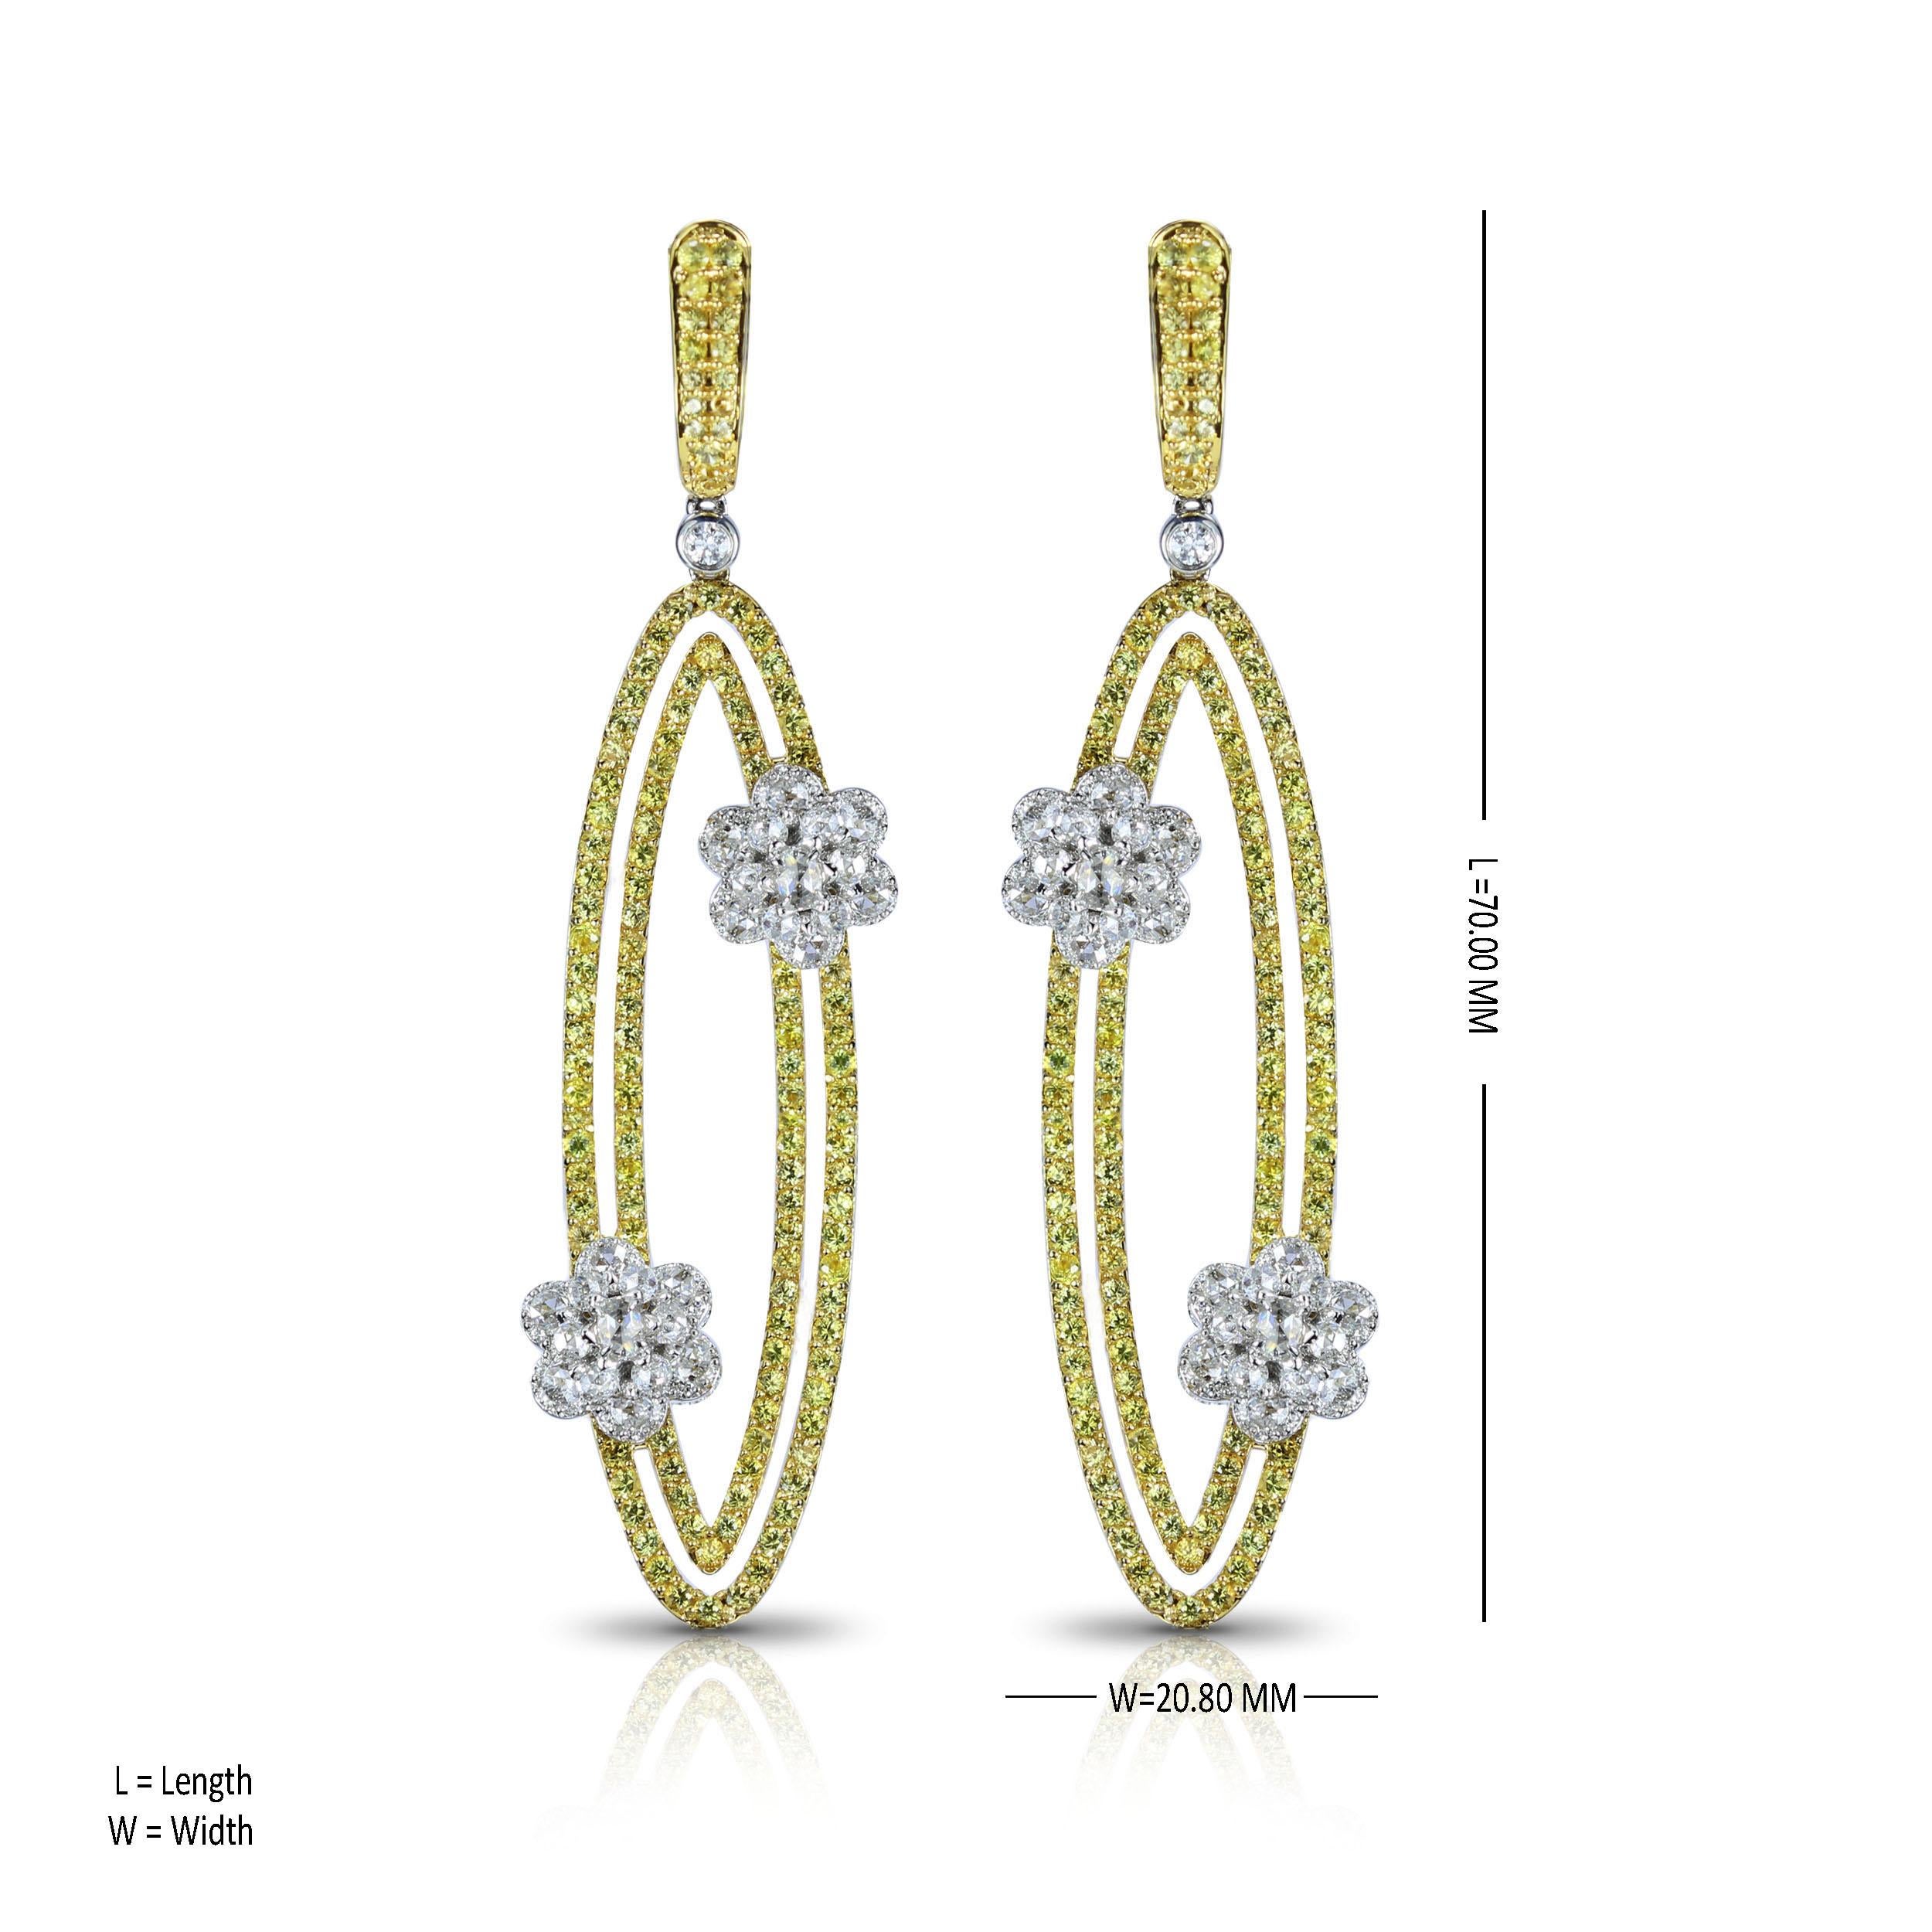 Studio Rêves Diamonds and Yellow Sapphire Oval Dangling Earrings in 18K Gold In New Condition For Sale In Mumbai, Maharashtra